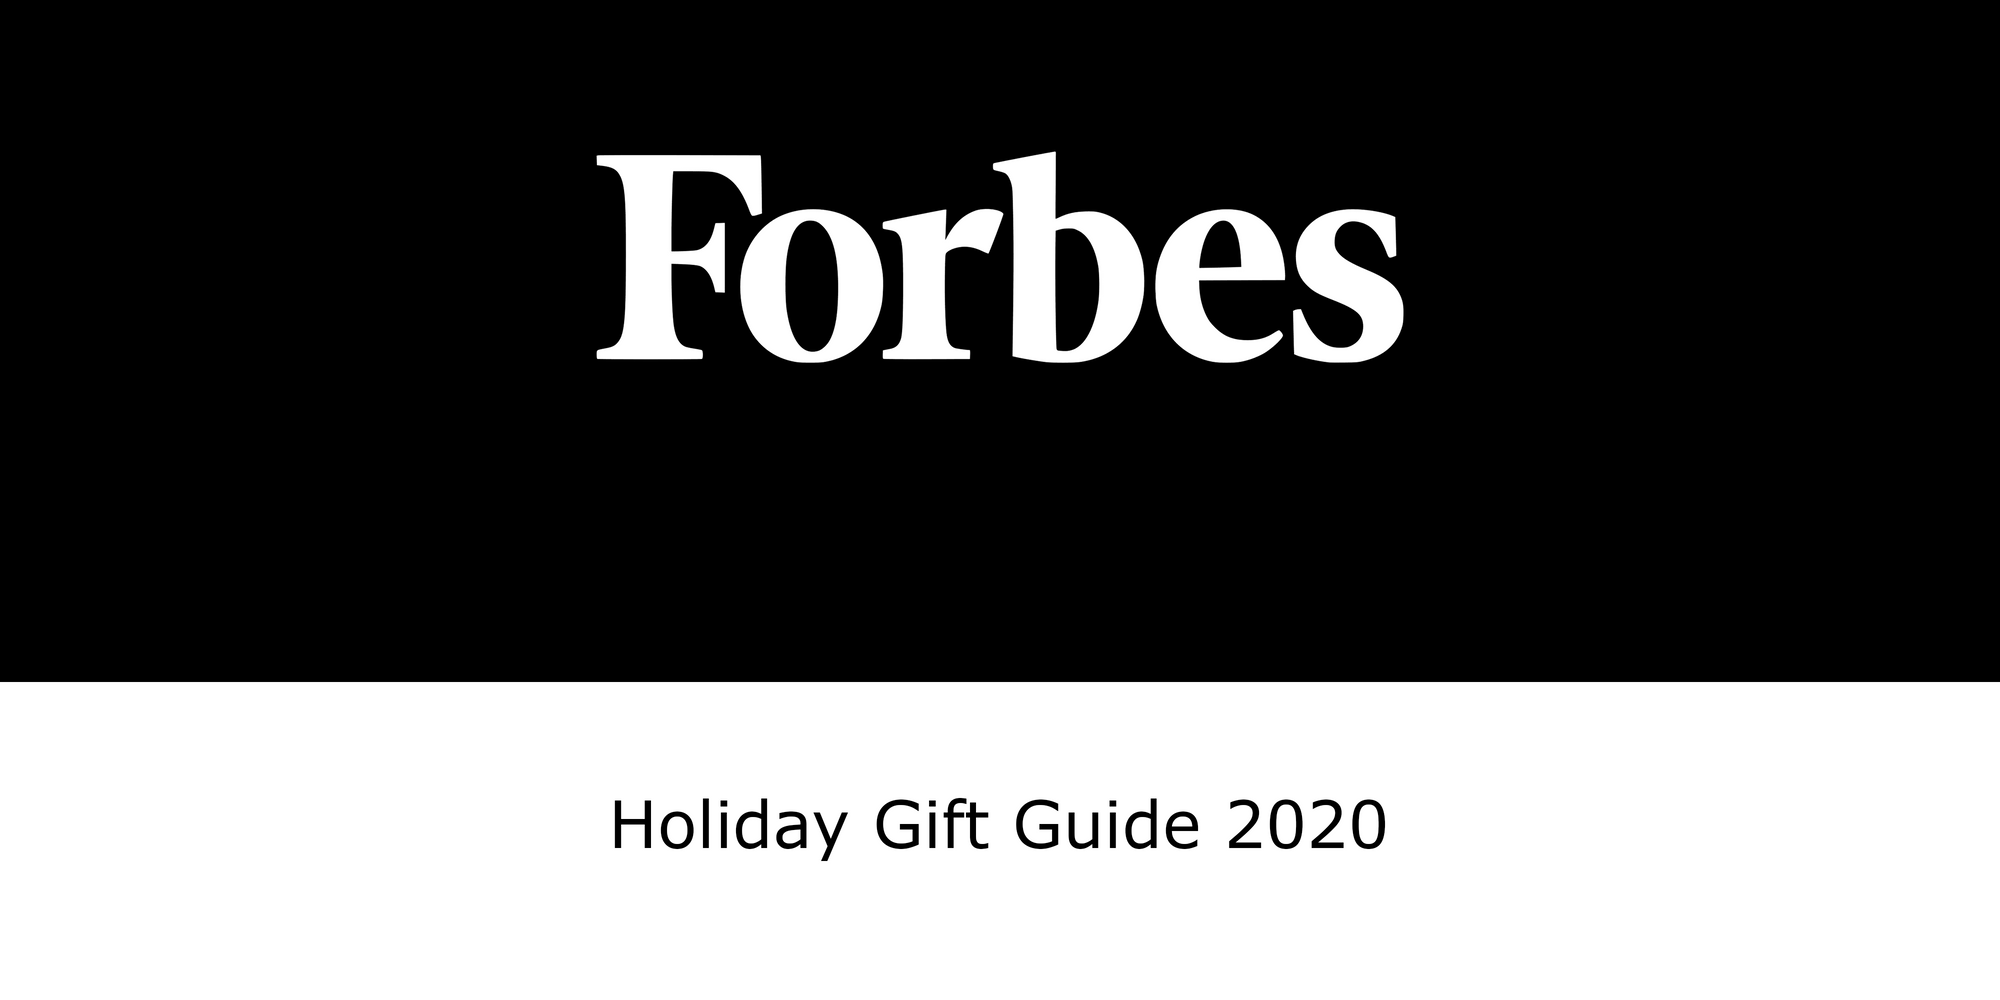 Forbes Names Nunbelievable Cookies a Perfect Holiday Gift That Gives Back